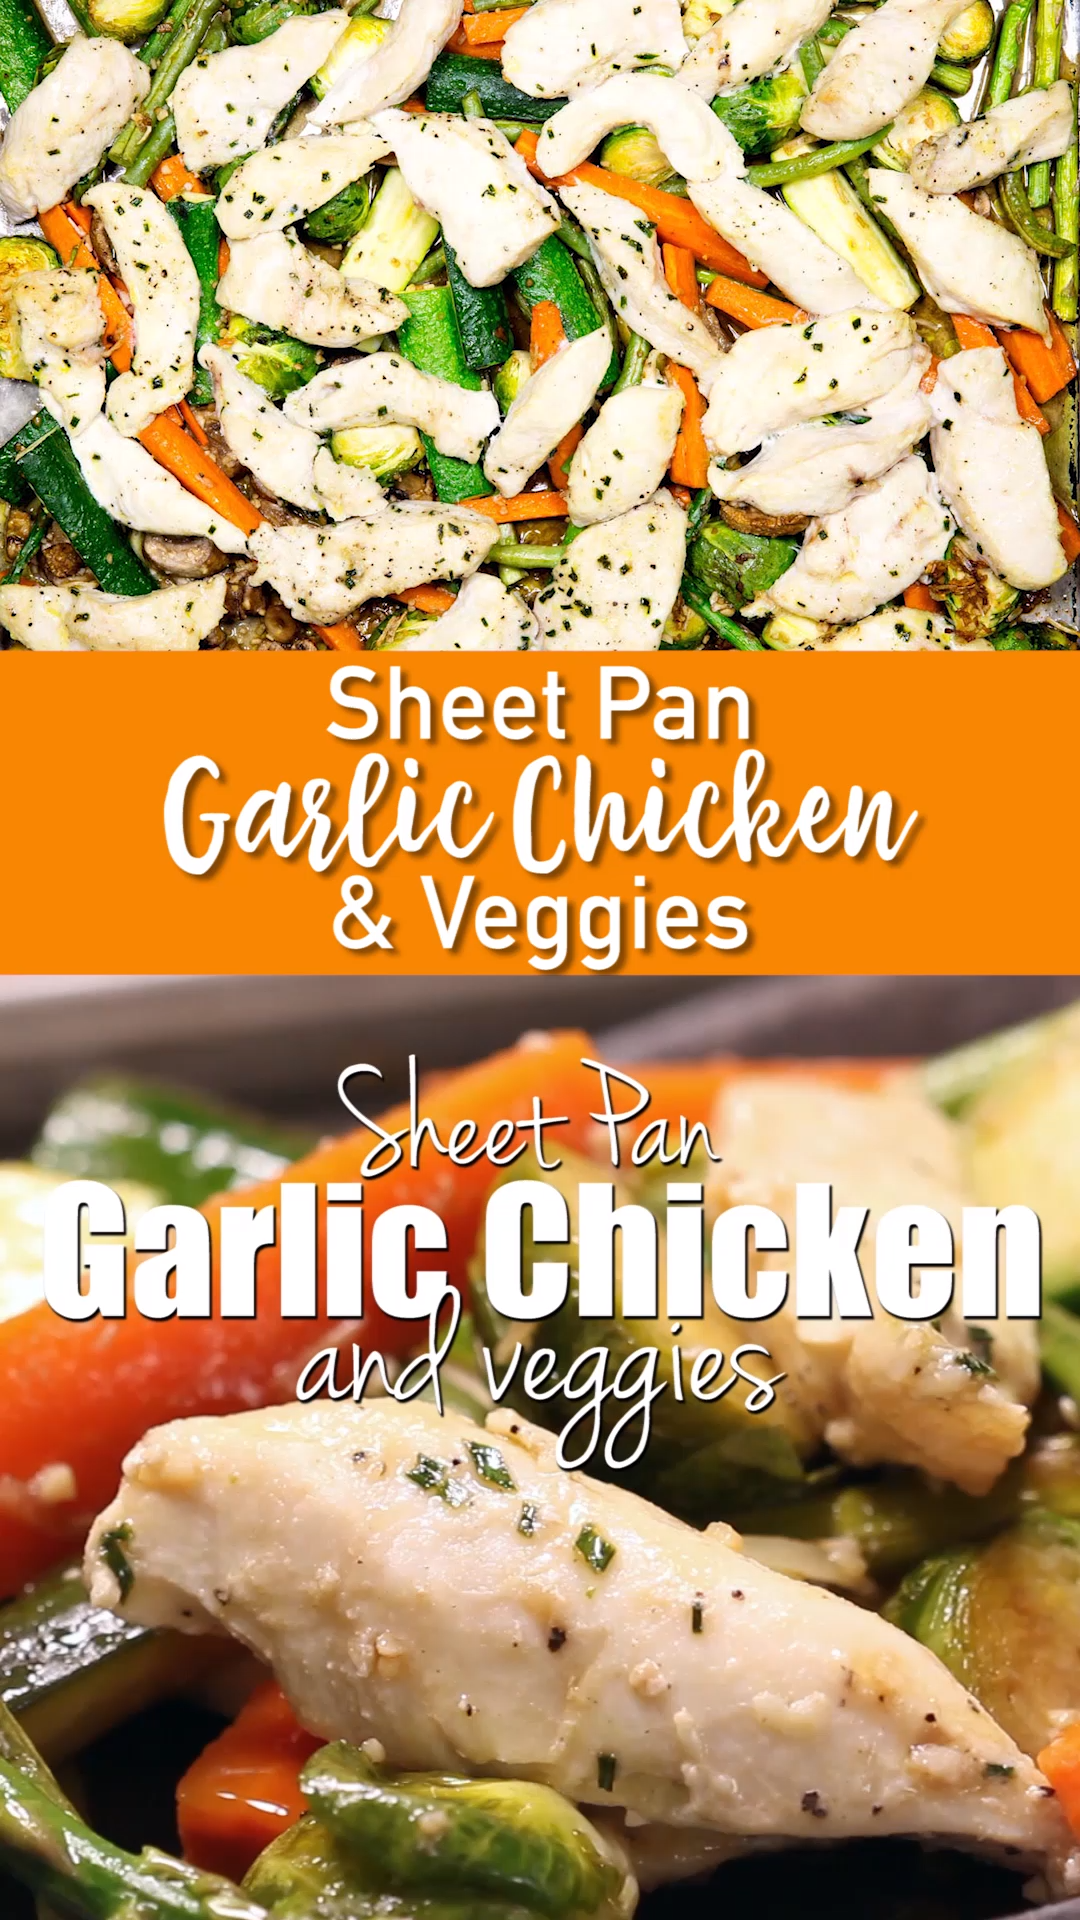 13 healthy recipes For The Week veggies ideas